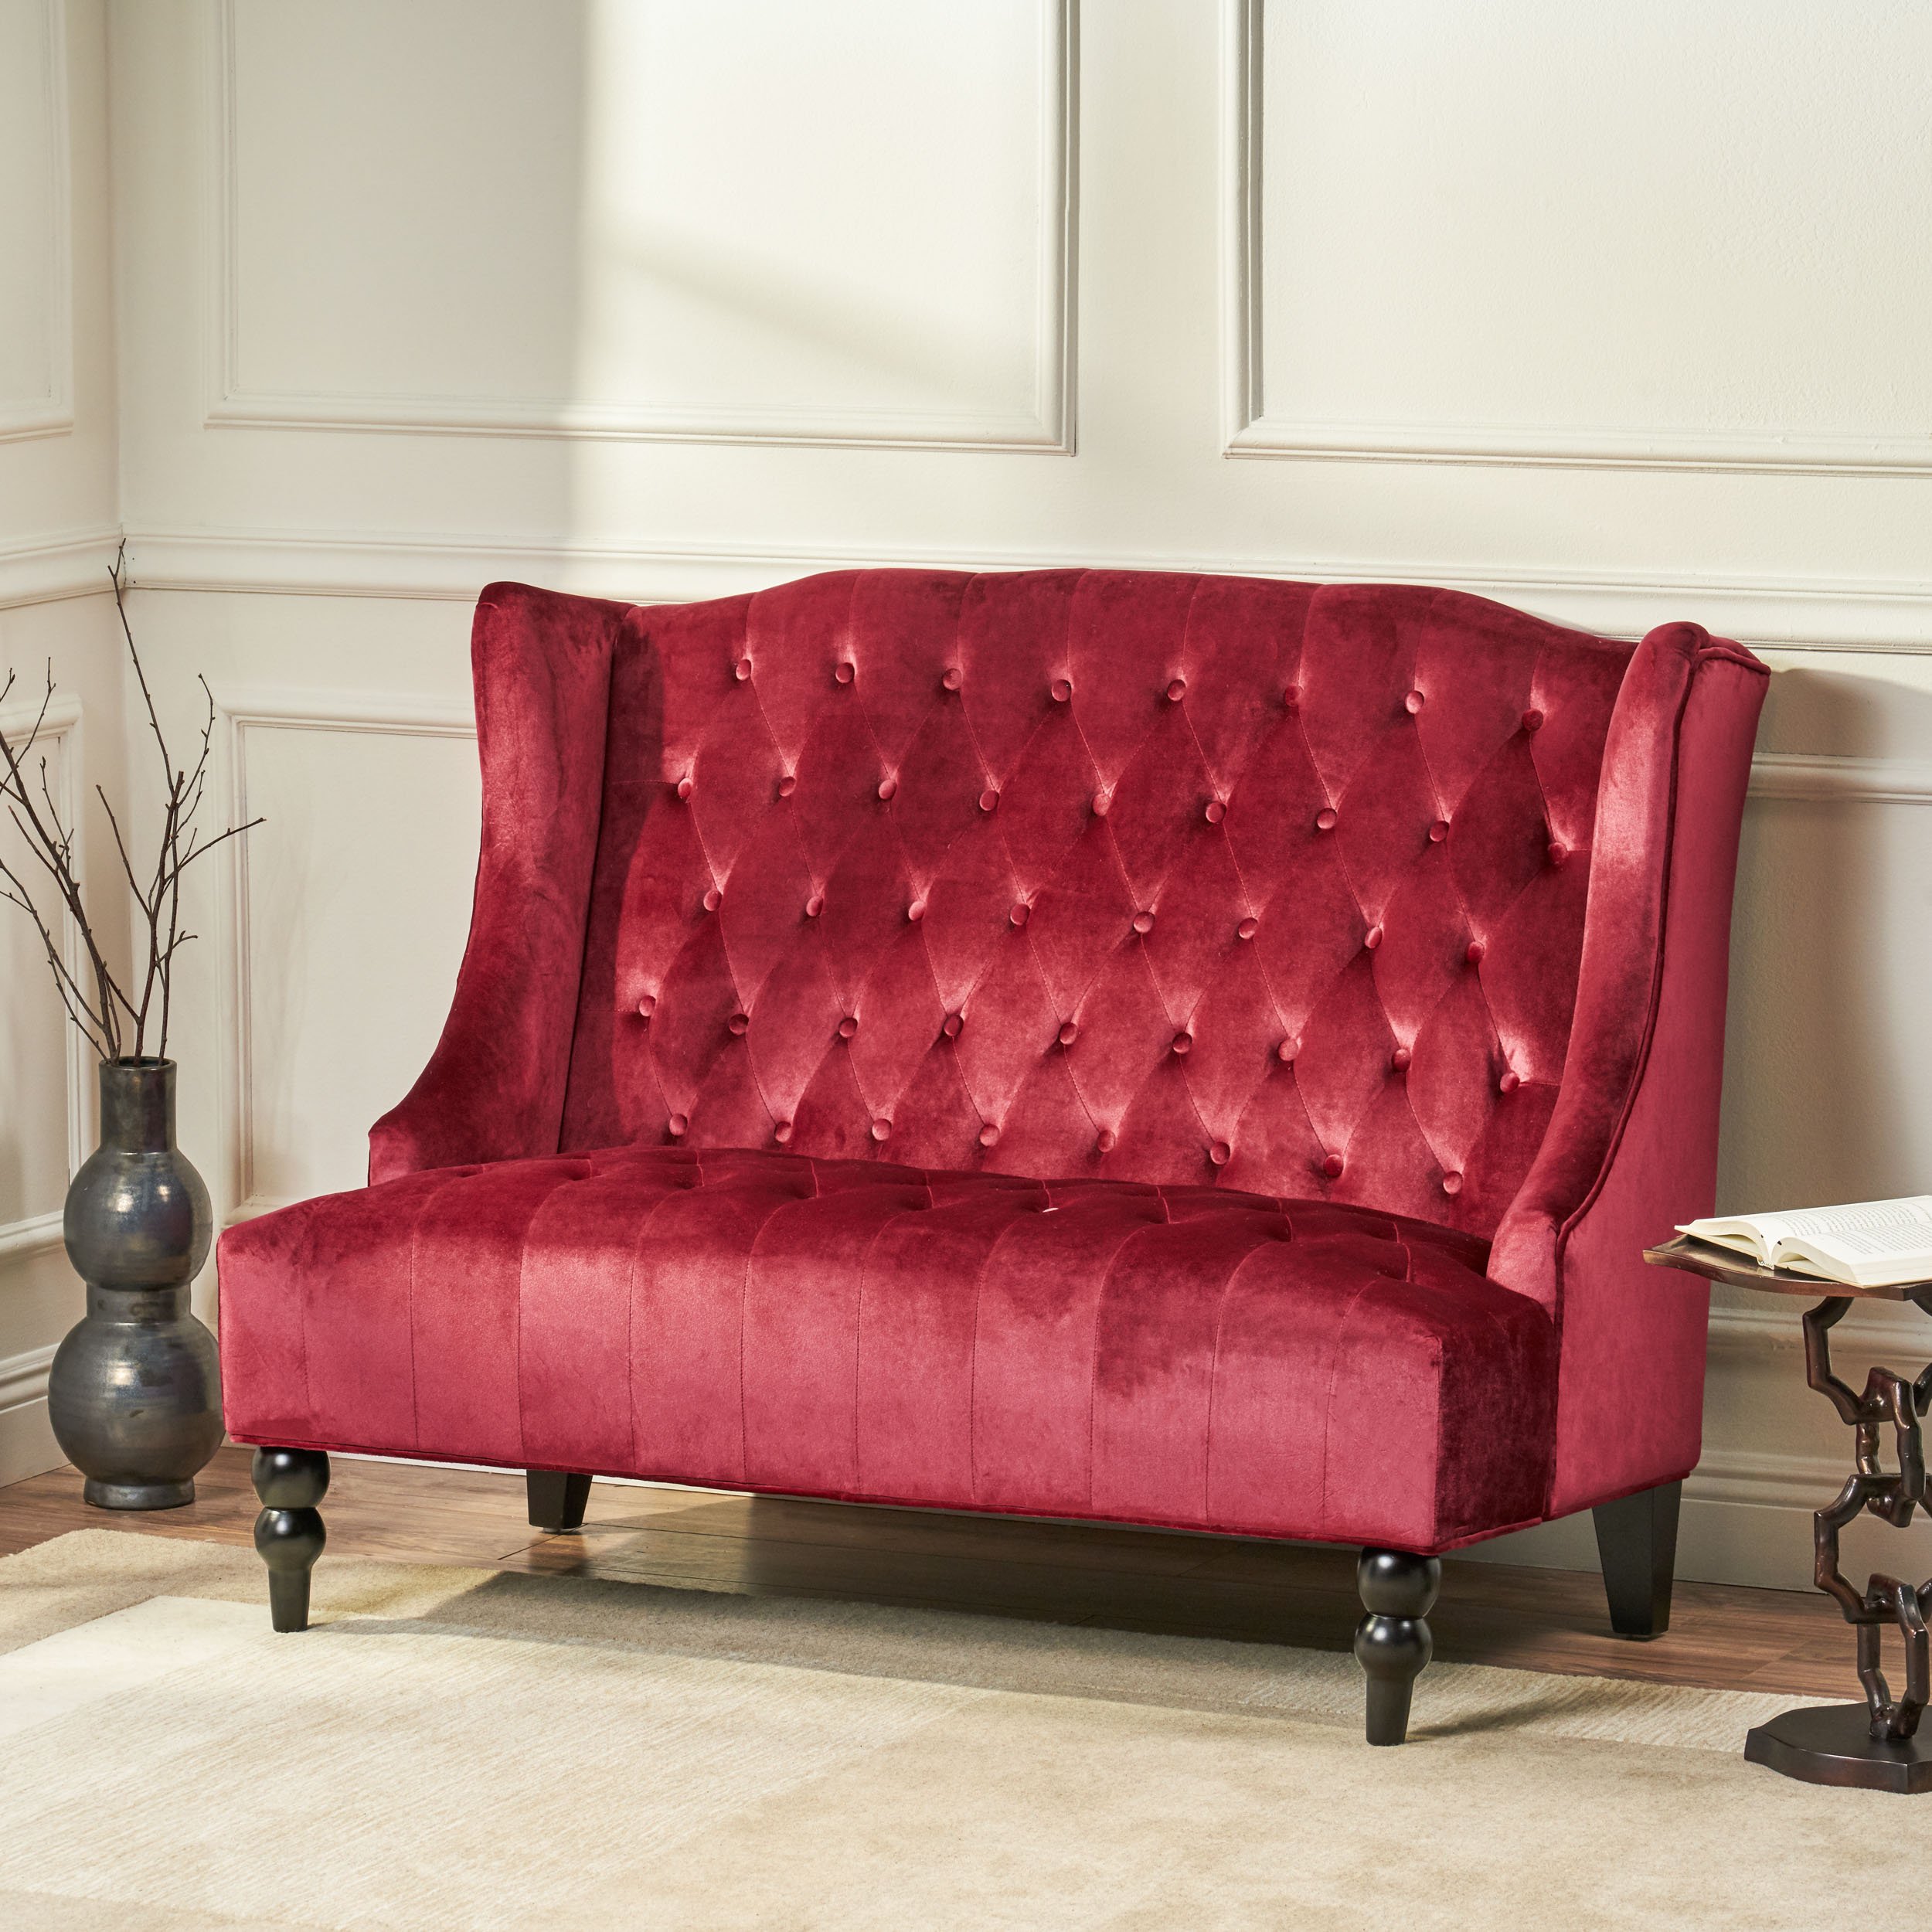 Leona Traditional High Back Tufted Winged Fabric Loveseat - Wine